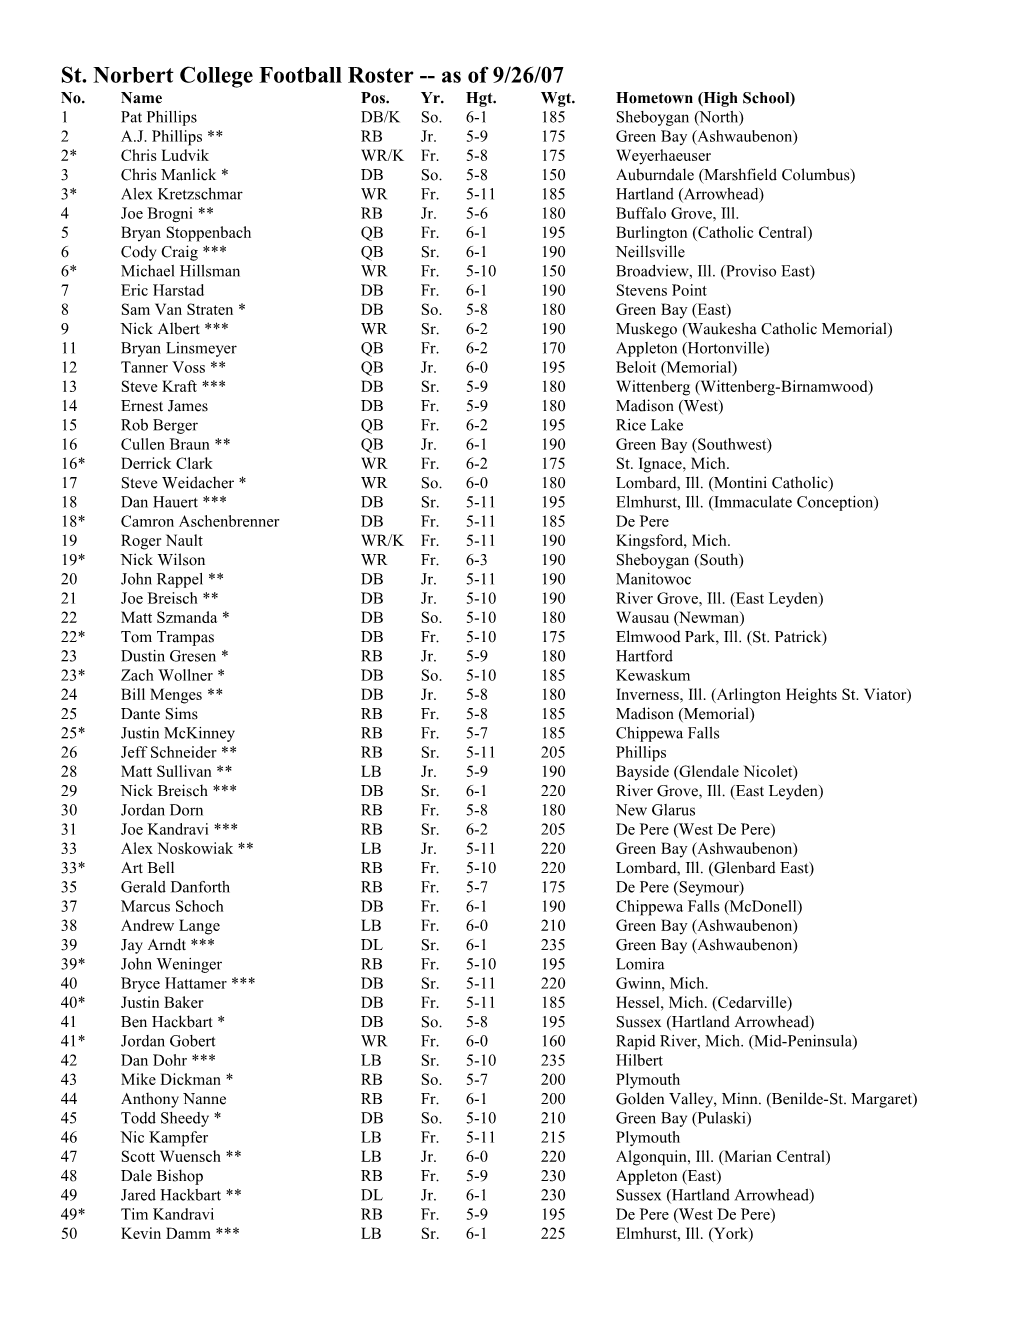 St. Norbert College Football Roster As of 9/26/07